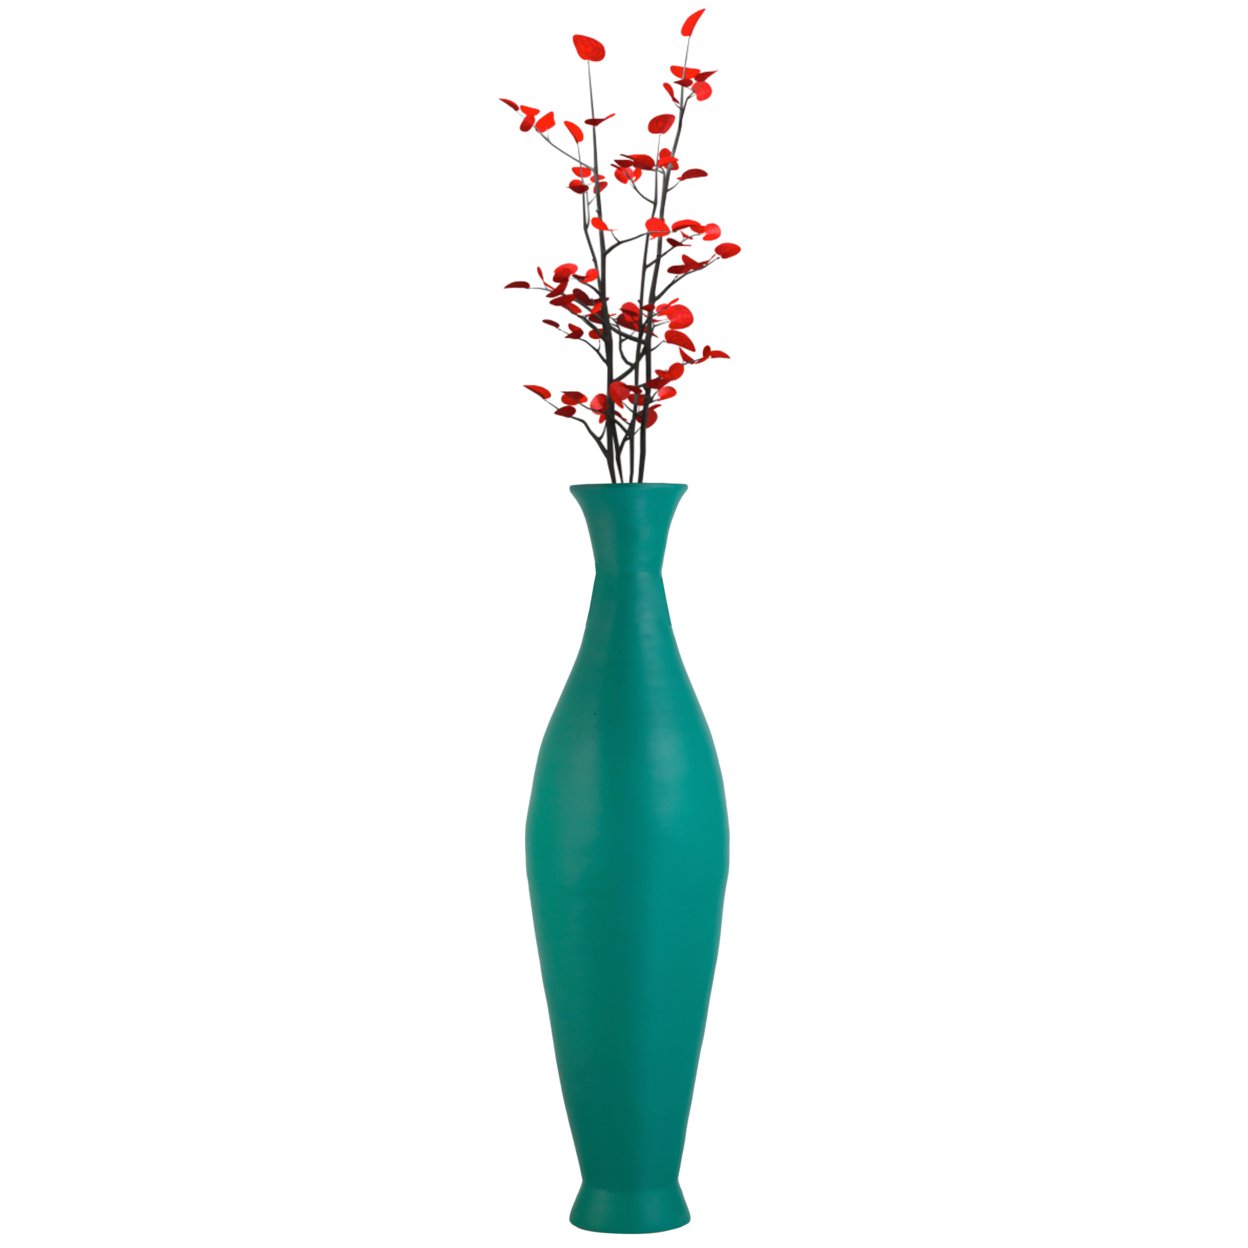 Modern Decorative Bamboo Floor Flower Vase For Living Room, Entryway Or Dining, Fill Up With Dried Branches Or Flowers, 43 Inch - Green